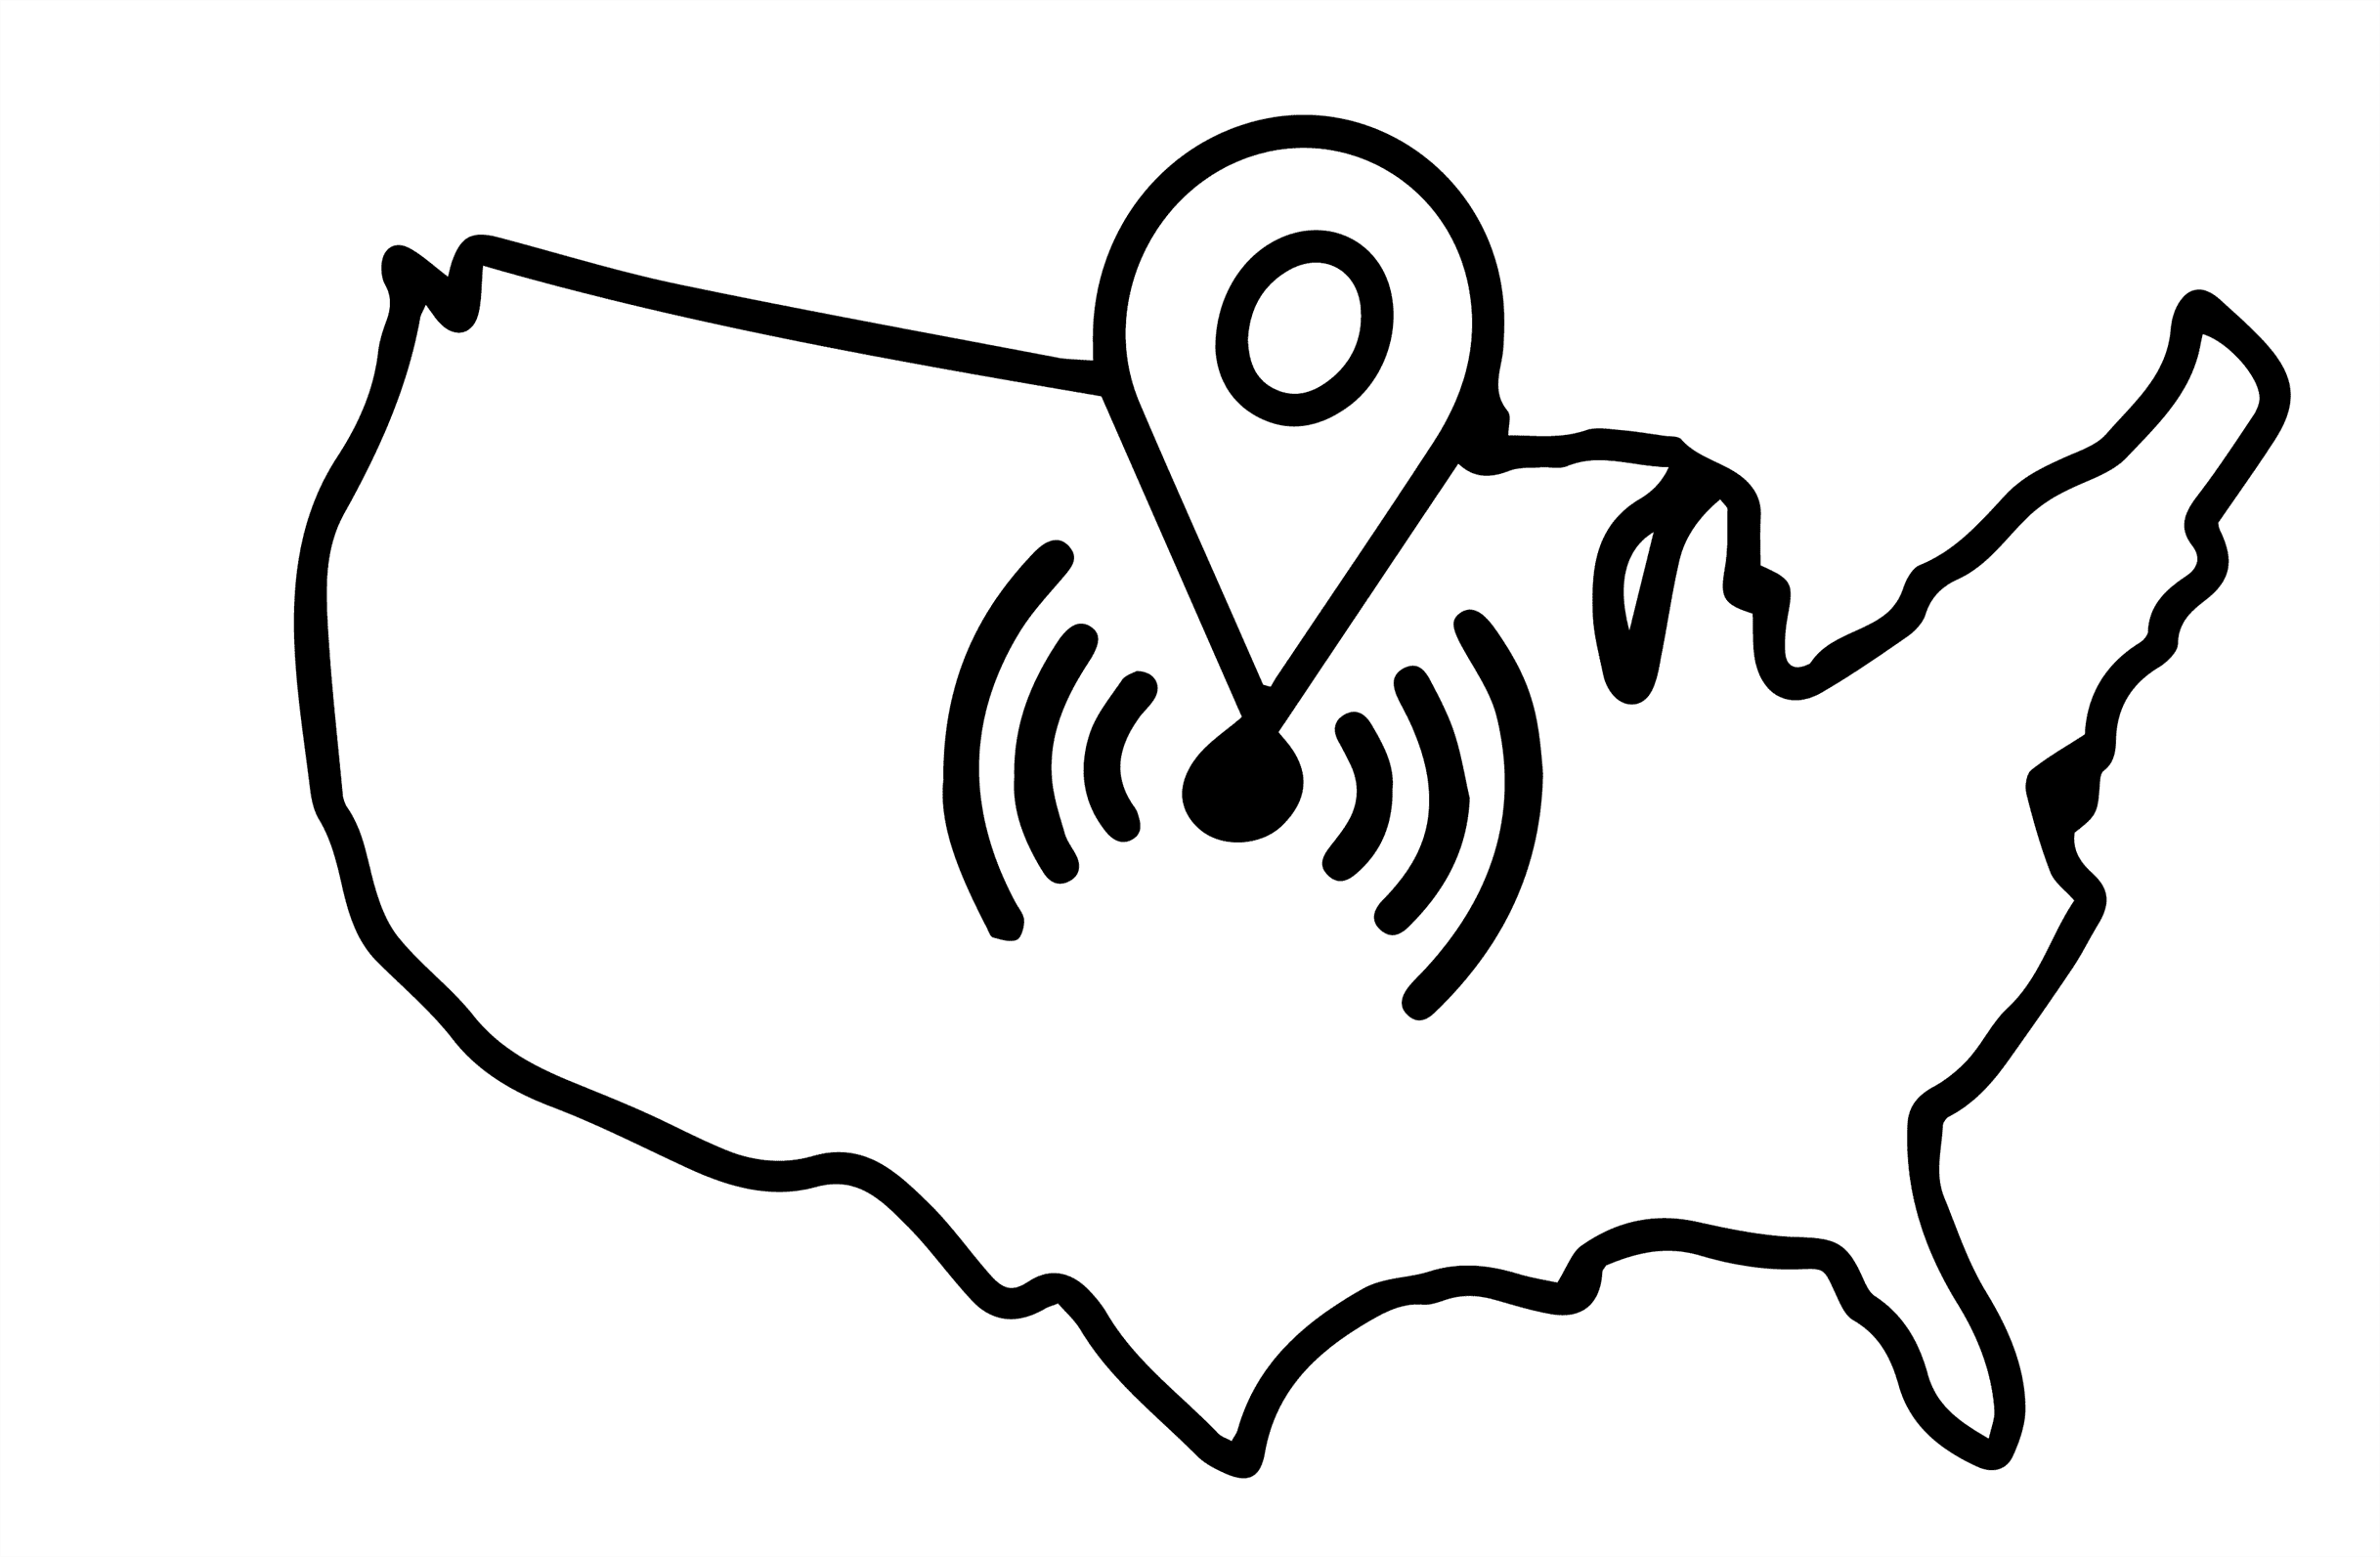 line outline of the United States with a pinpoint in the middle.